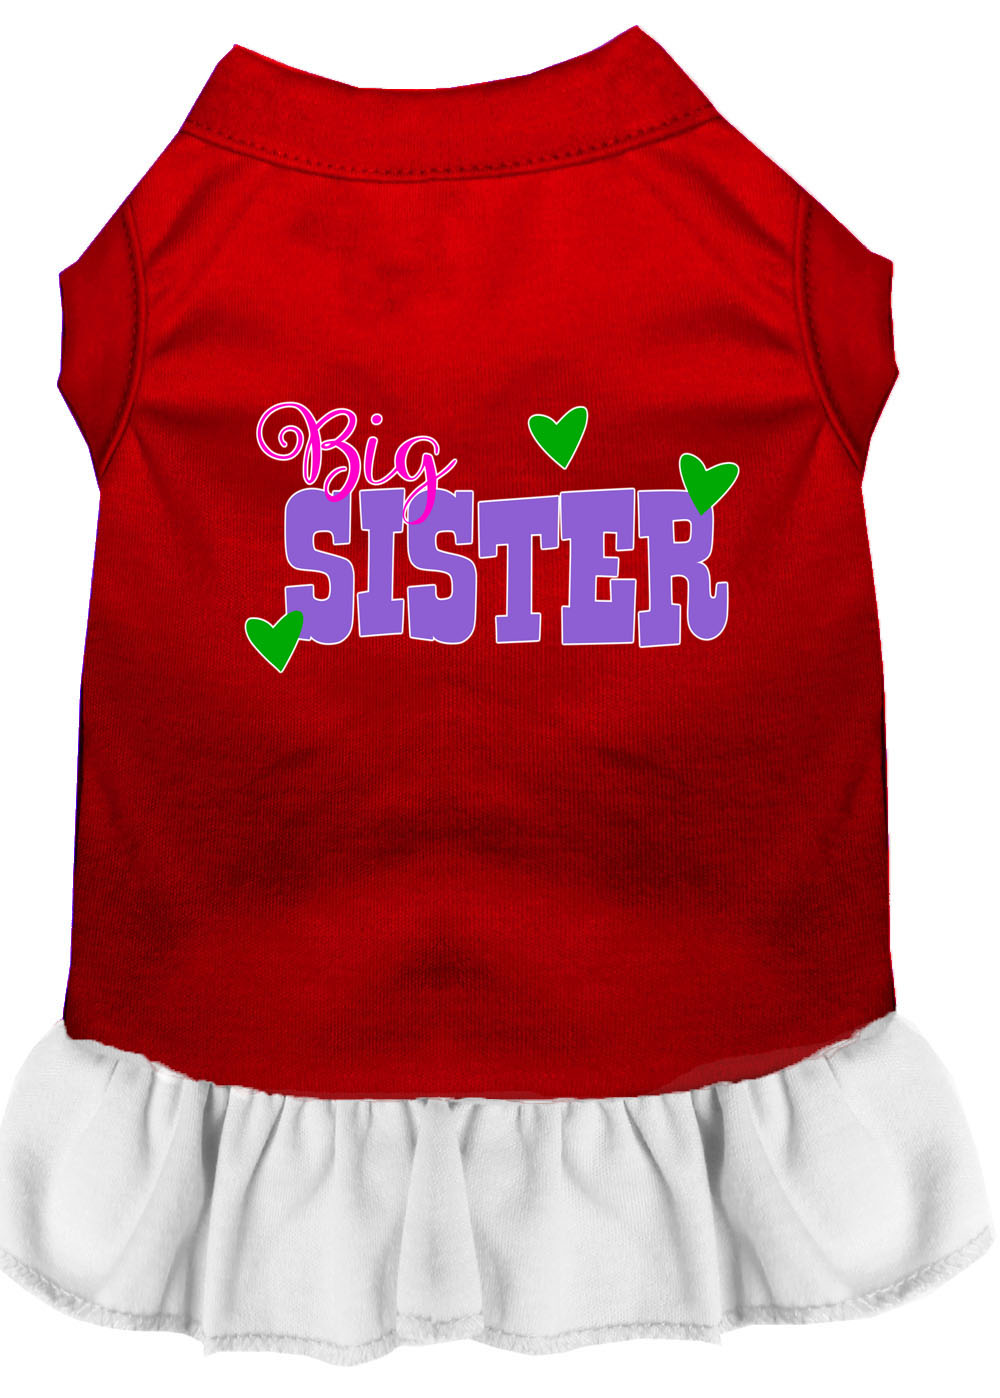 Big Sister Screen Print Dog Dress Red with White Sm